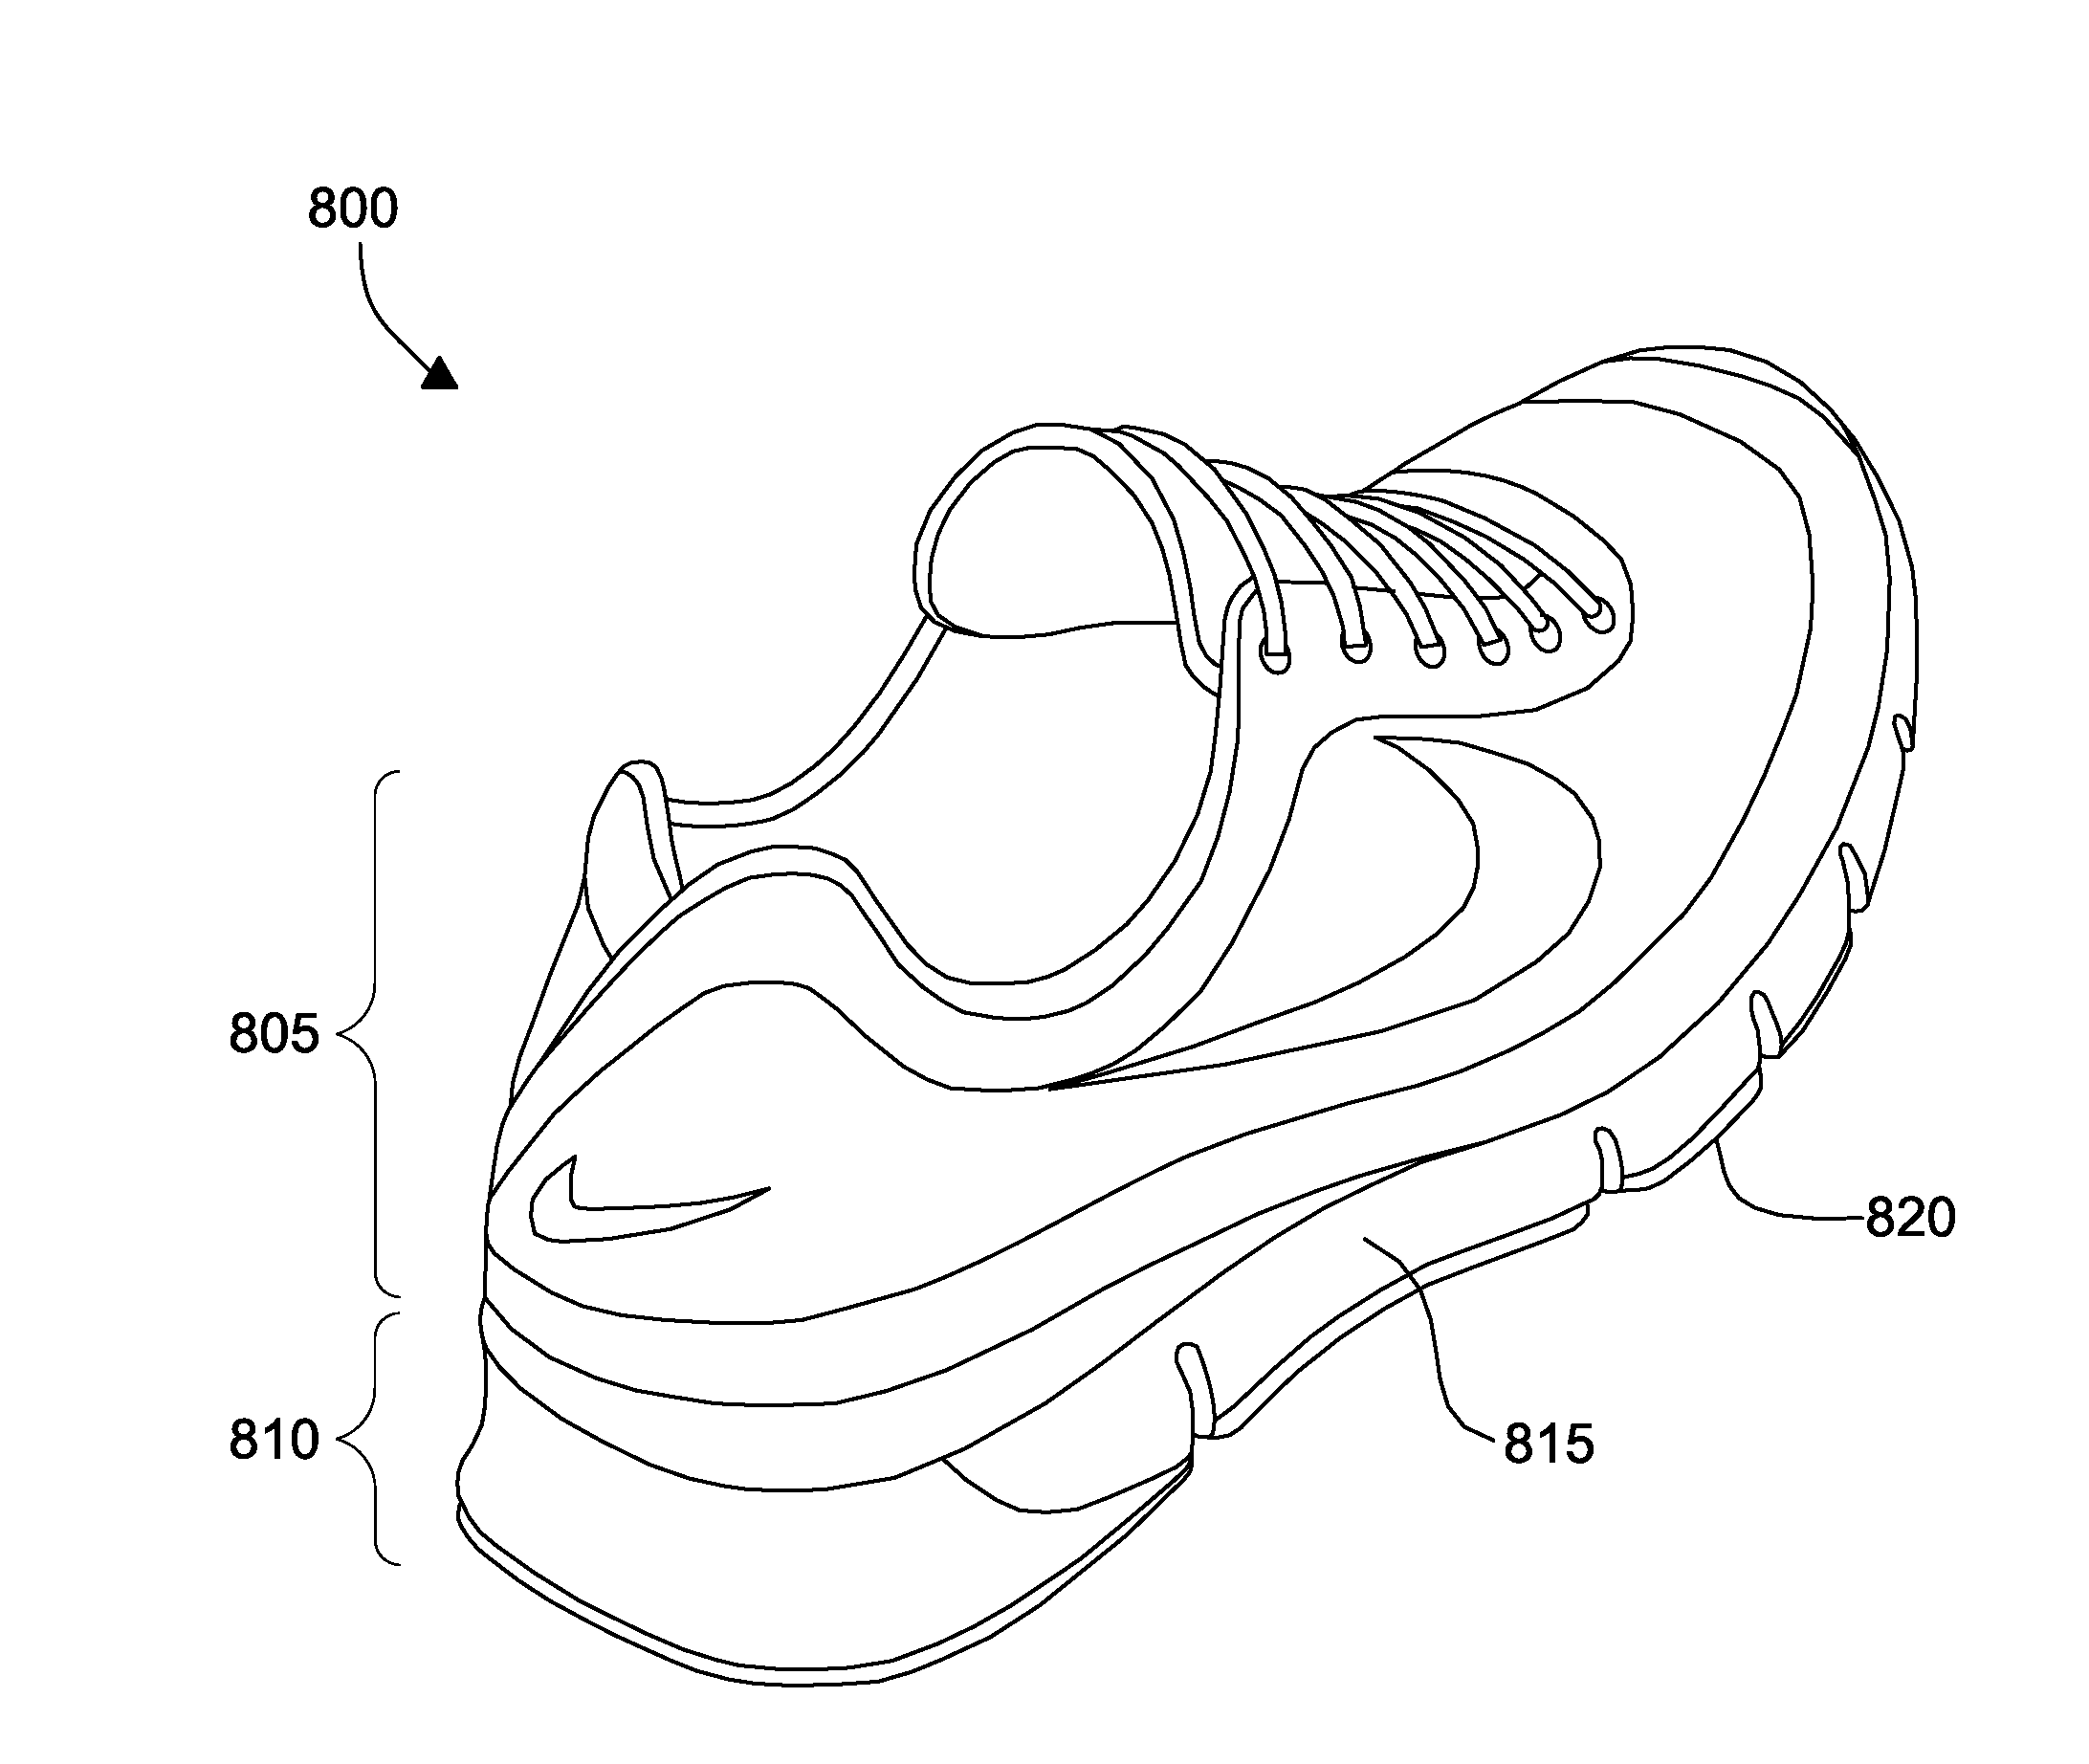 Shoe Having A Midsole With Heel Support